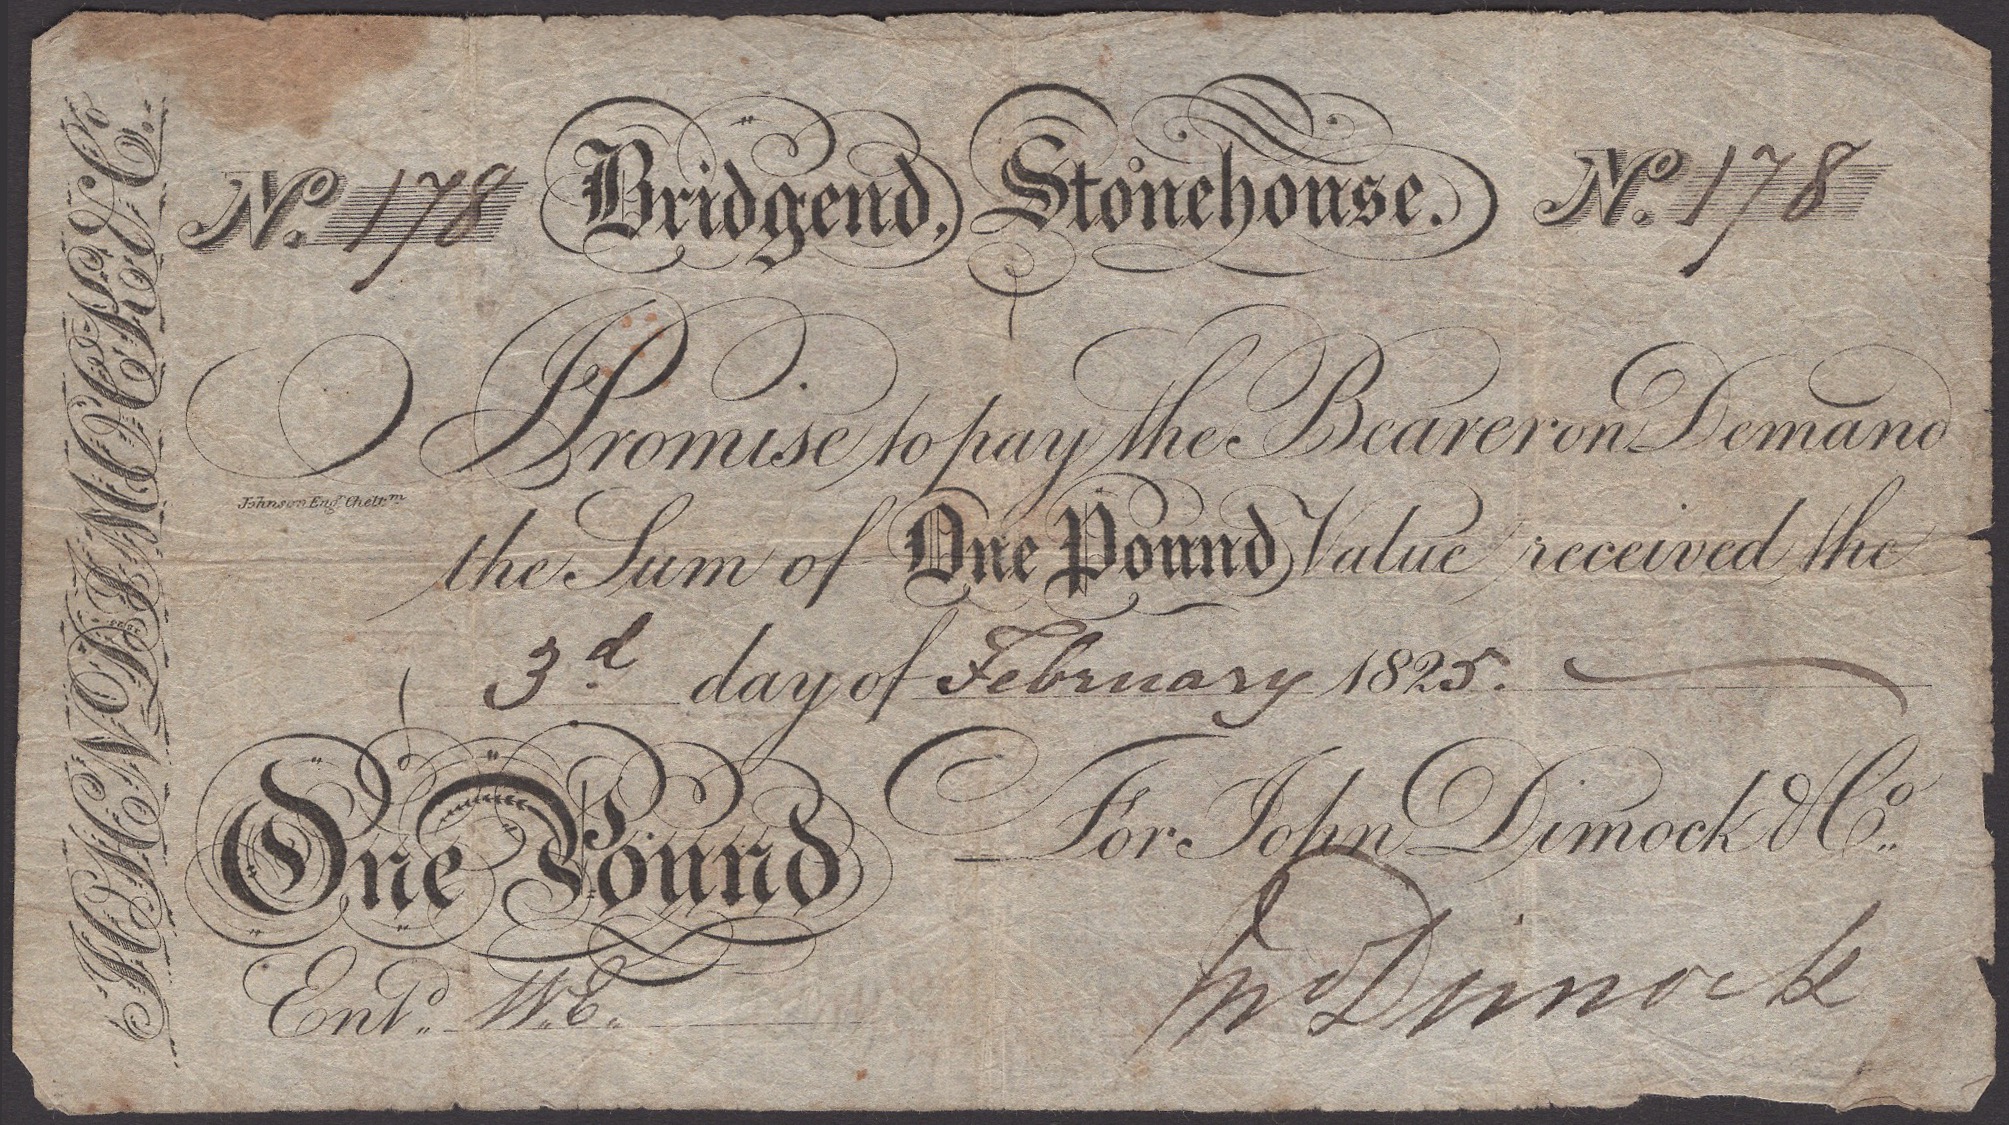 The David Muscott Collection of Northern County Provincial Banknotes